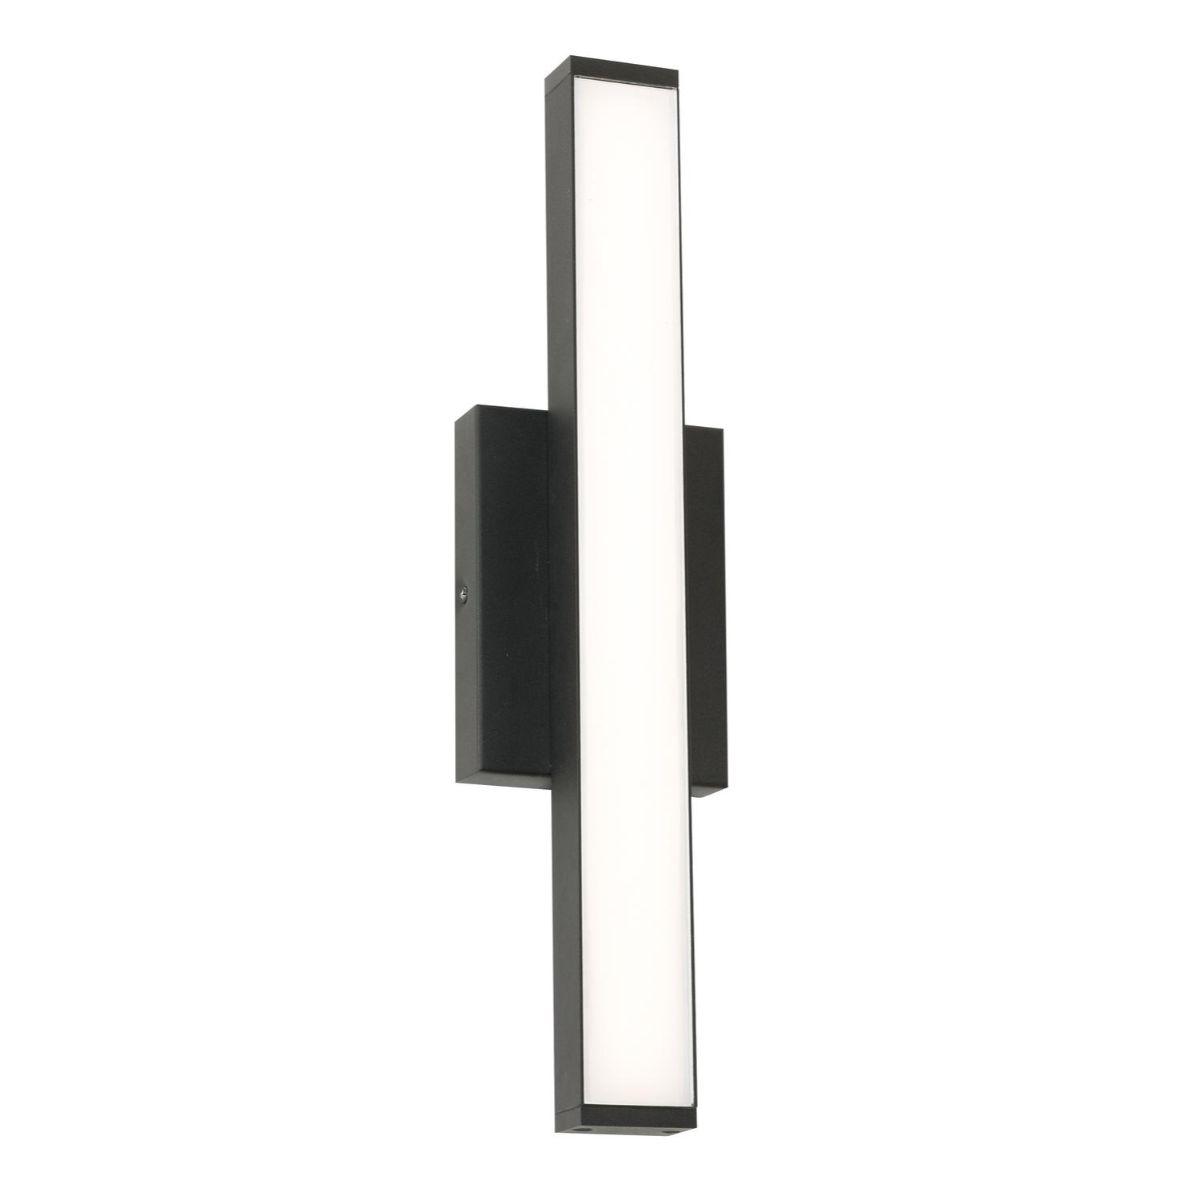 Gale 18 in. LED Outdoor Wall Sconce 800 lumens 3000K